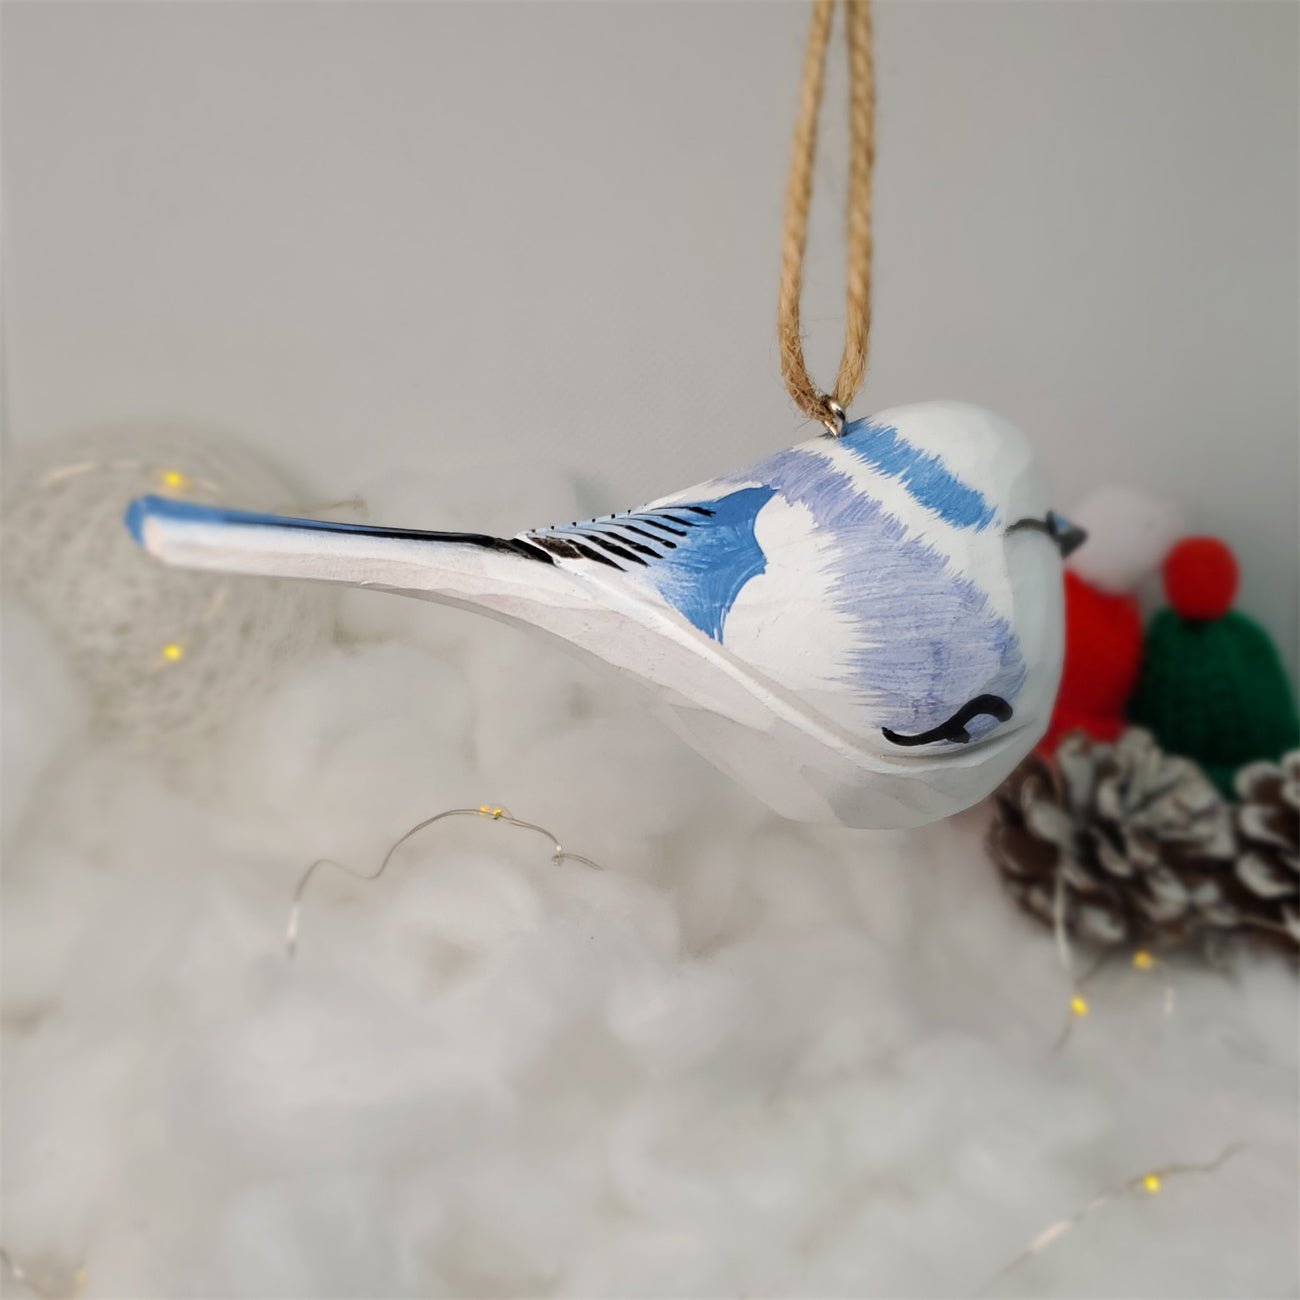 Azure tit Carved and Painted Wooden Bird Ornaments - PAINTED BIRD SHOP